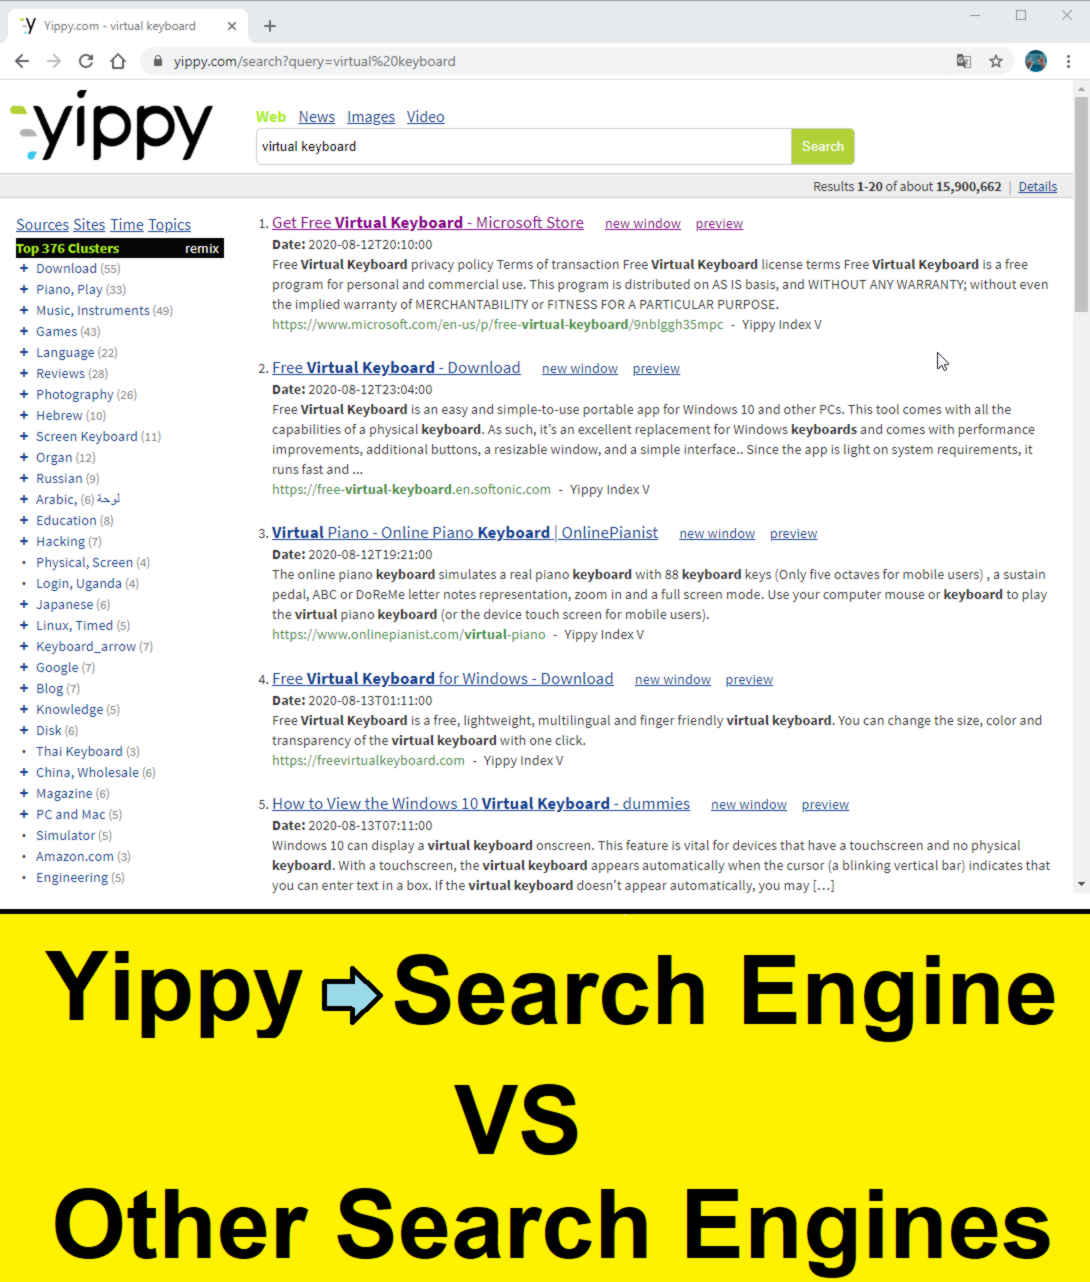 compare yippy search engine